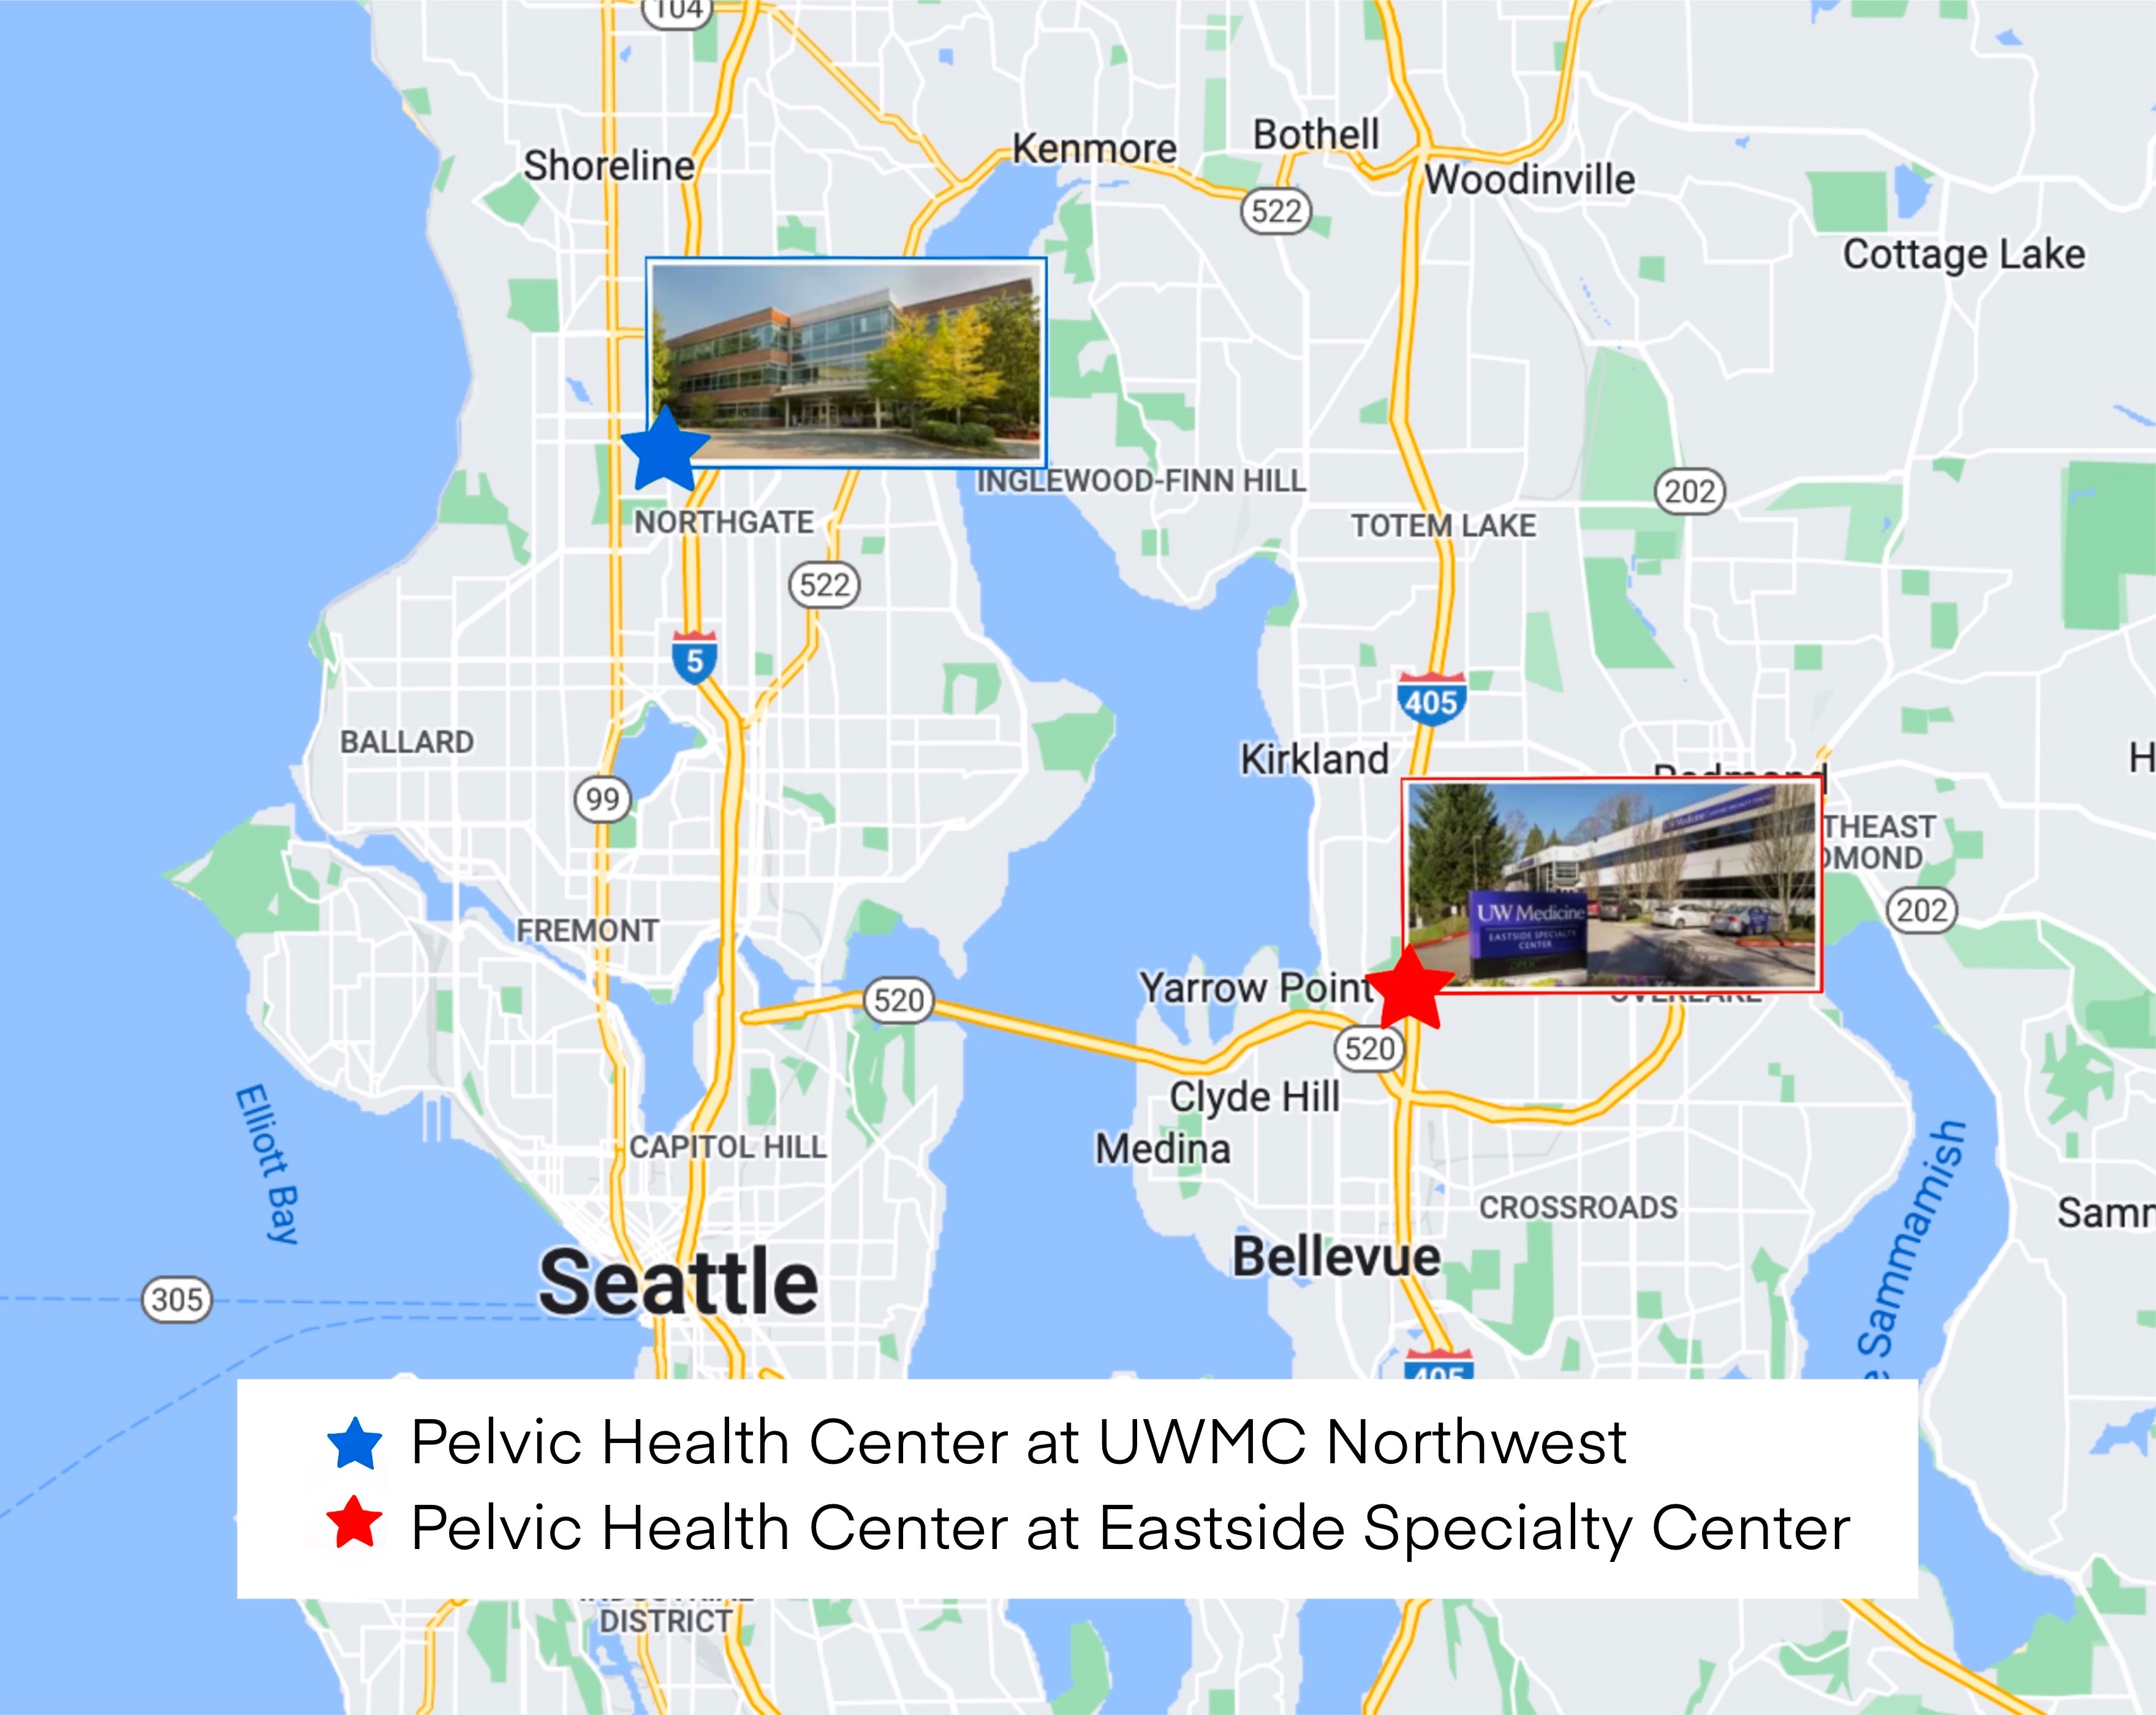 Map reflecting Pelvic Health locations at UWMC Northwest and Eastside Specialty Center